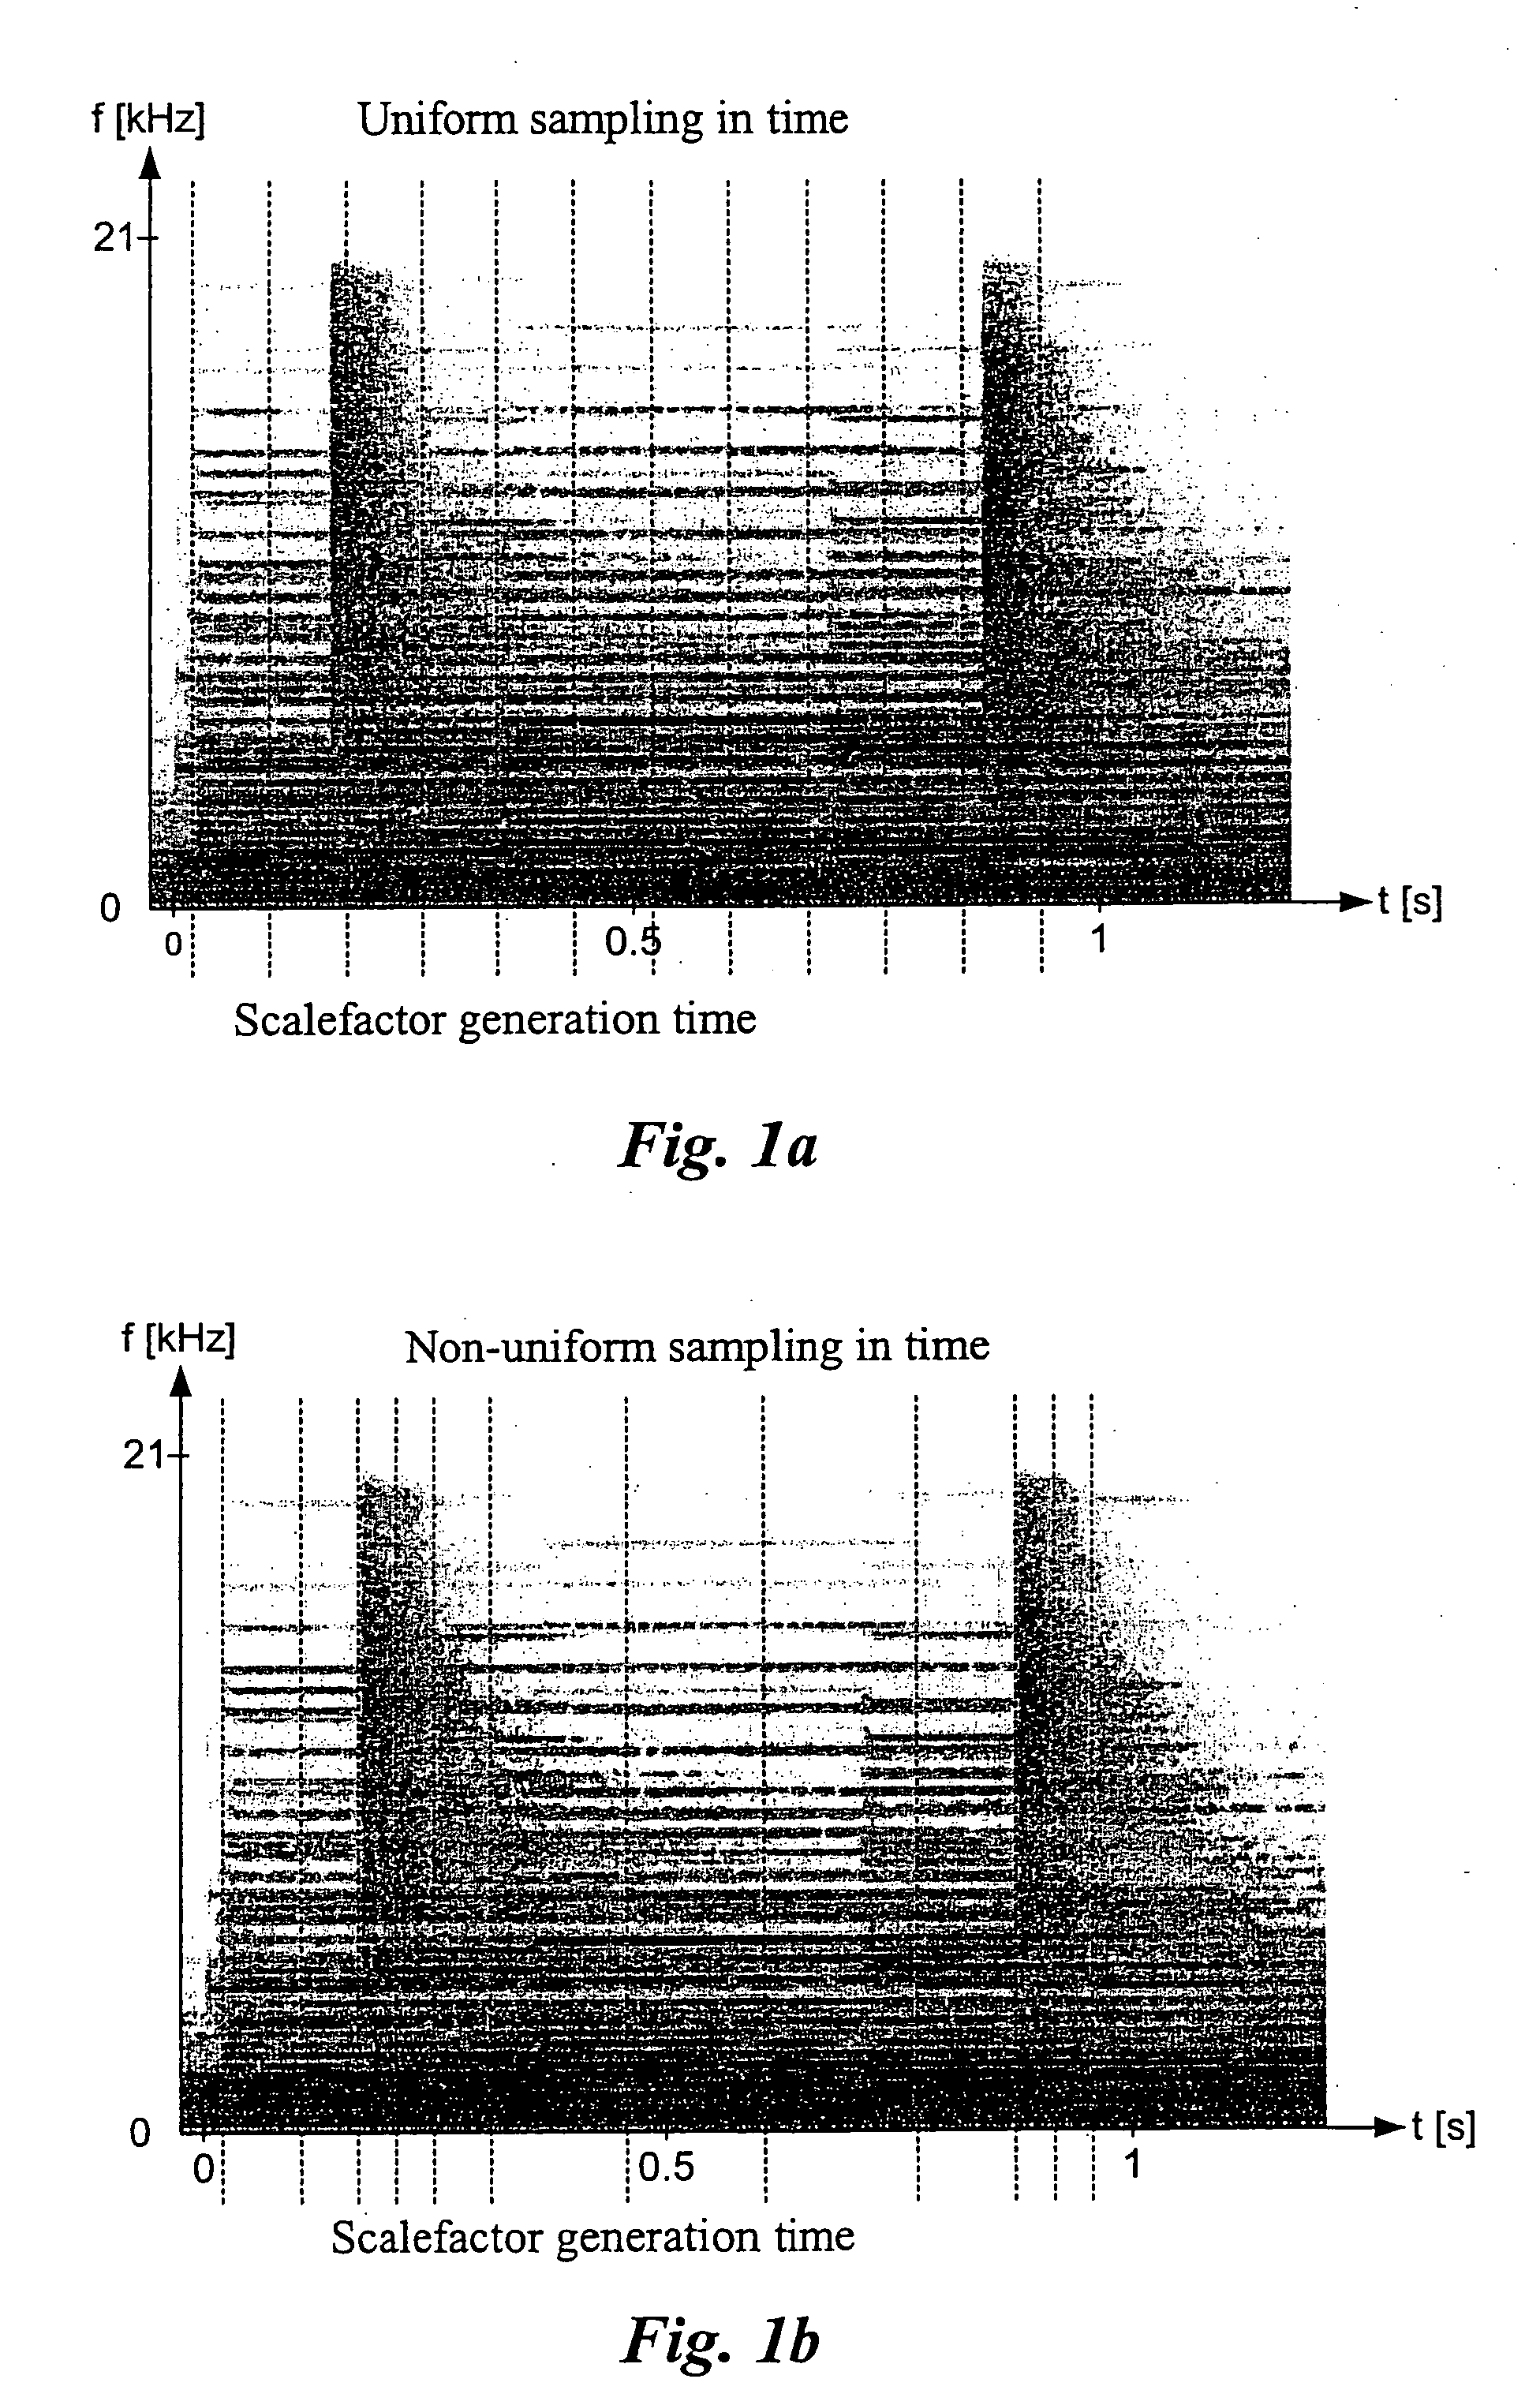 Efficient spectral envelope coding using variable time/frequency resolution and time/frequency switching